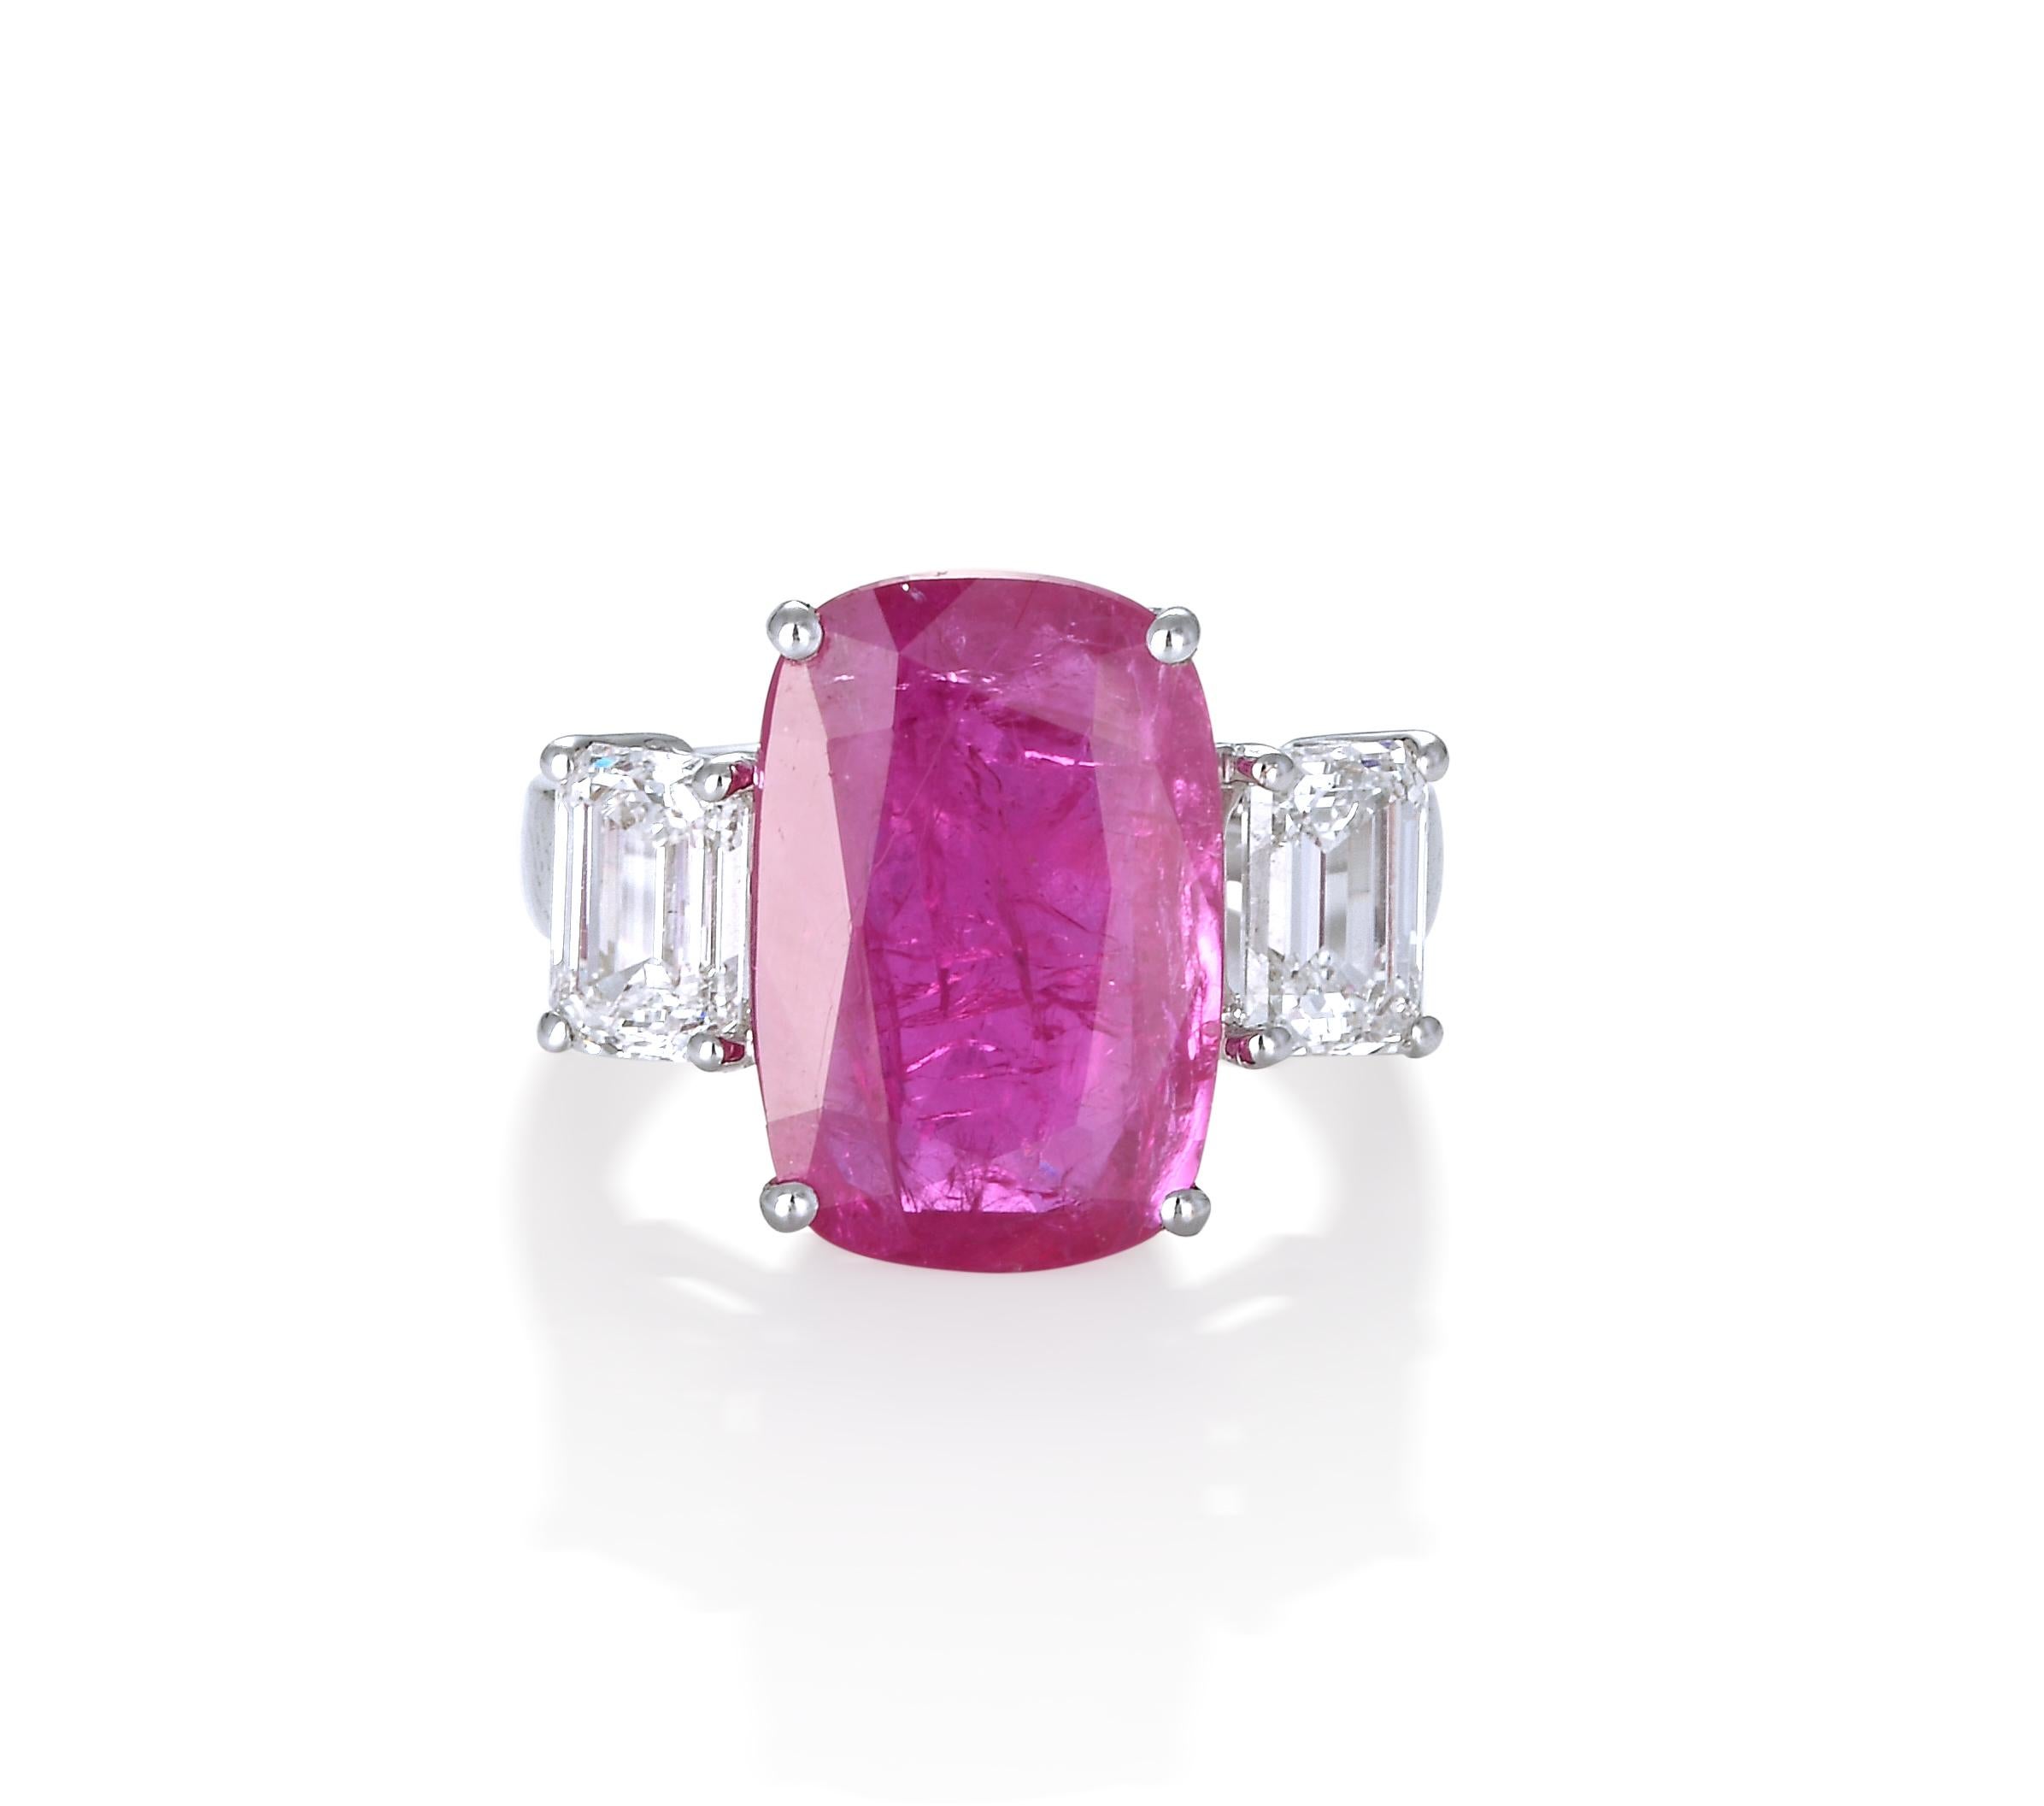 Women's Classic 6.61 Carat Ruby Ring with 2.01 Carat Emerald Cut Diamonds For Sale